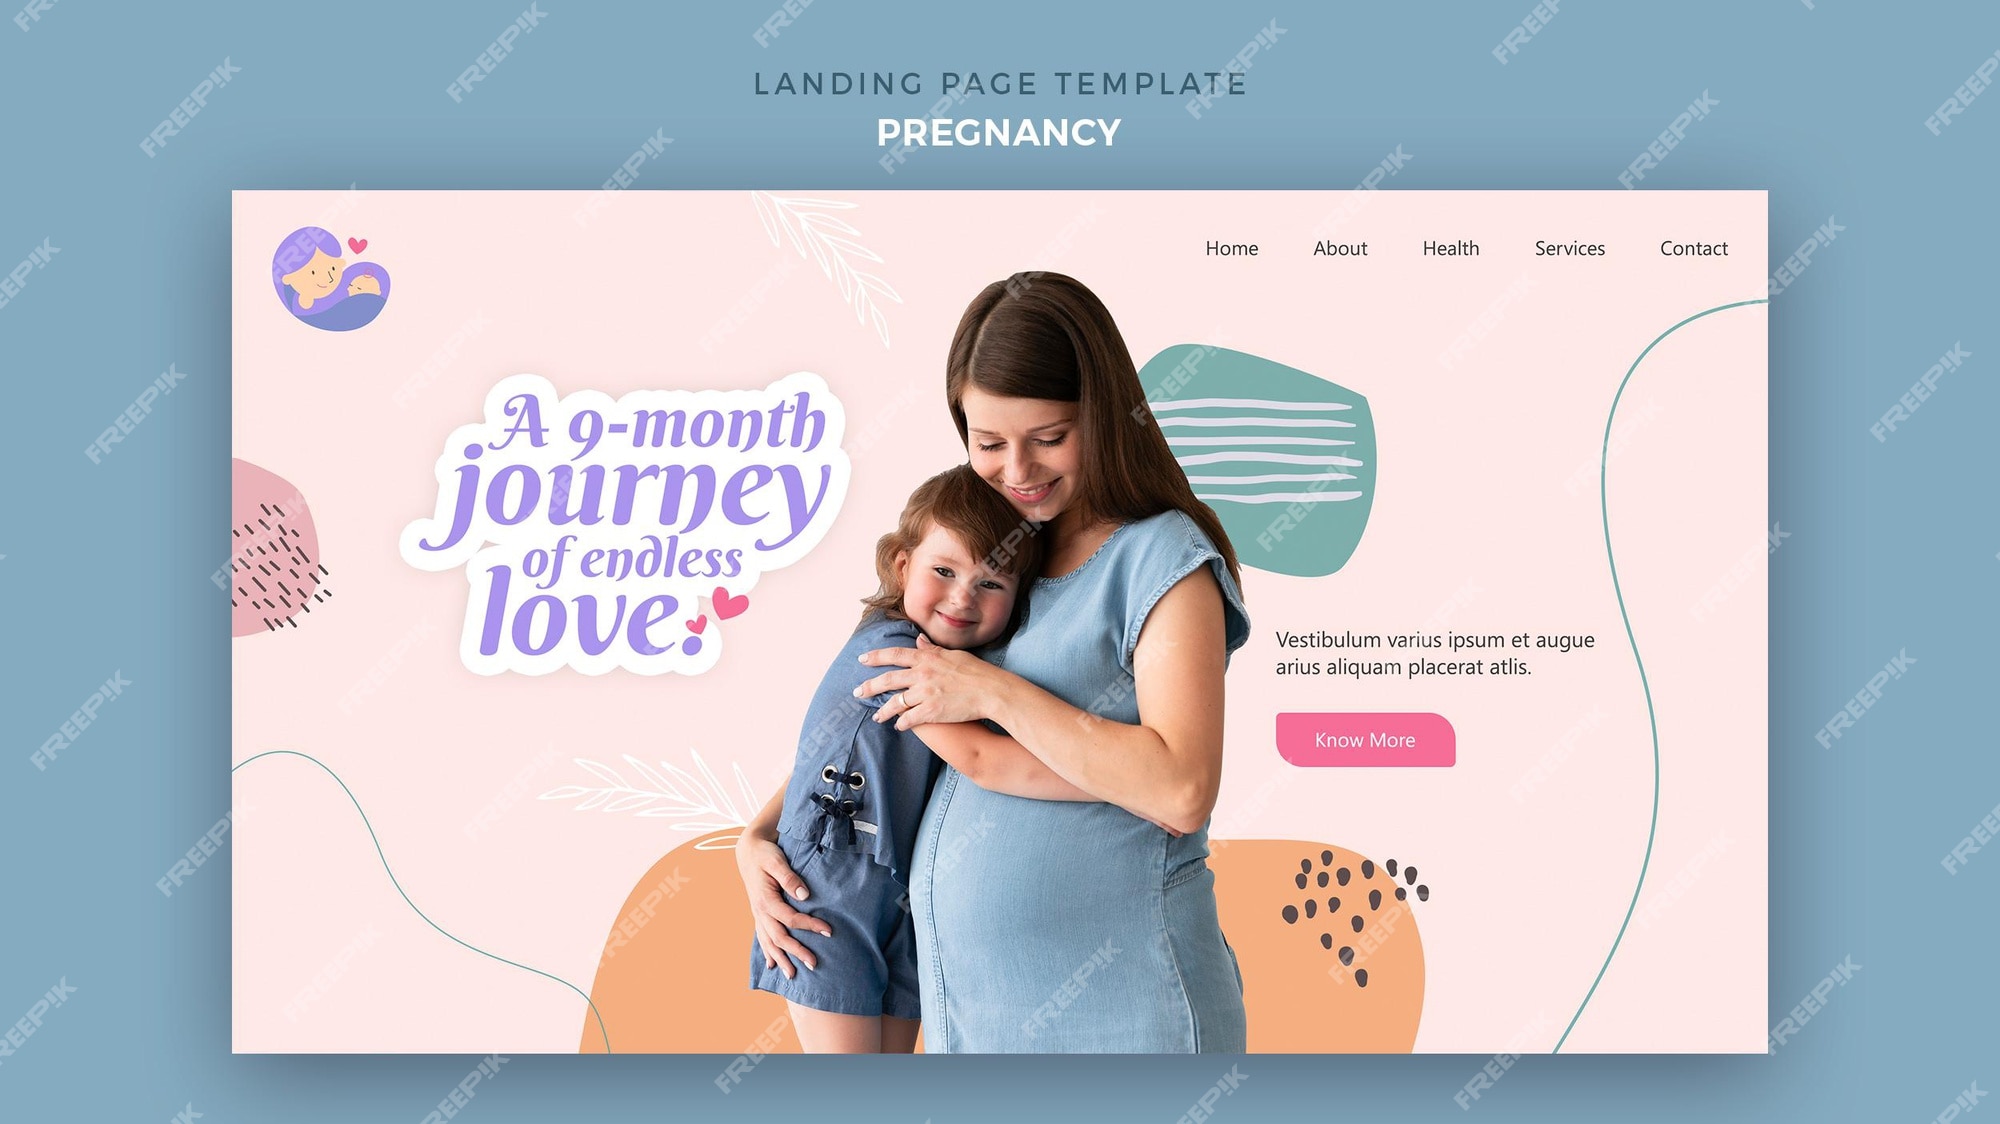 Maternity Leave PSD, 100+ High Quality Free PSD Templates for Download